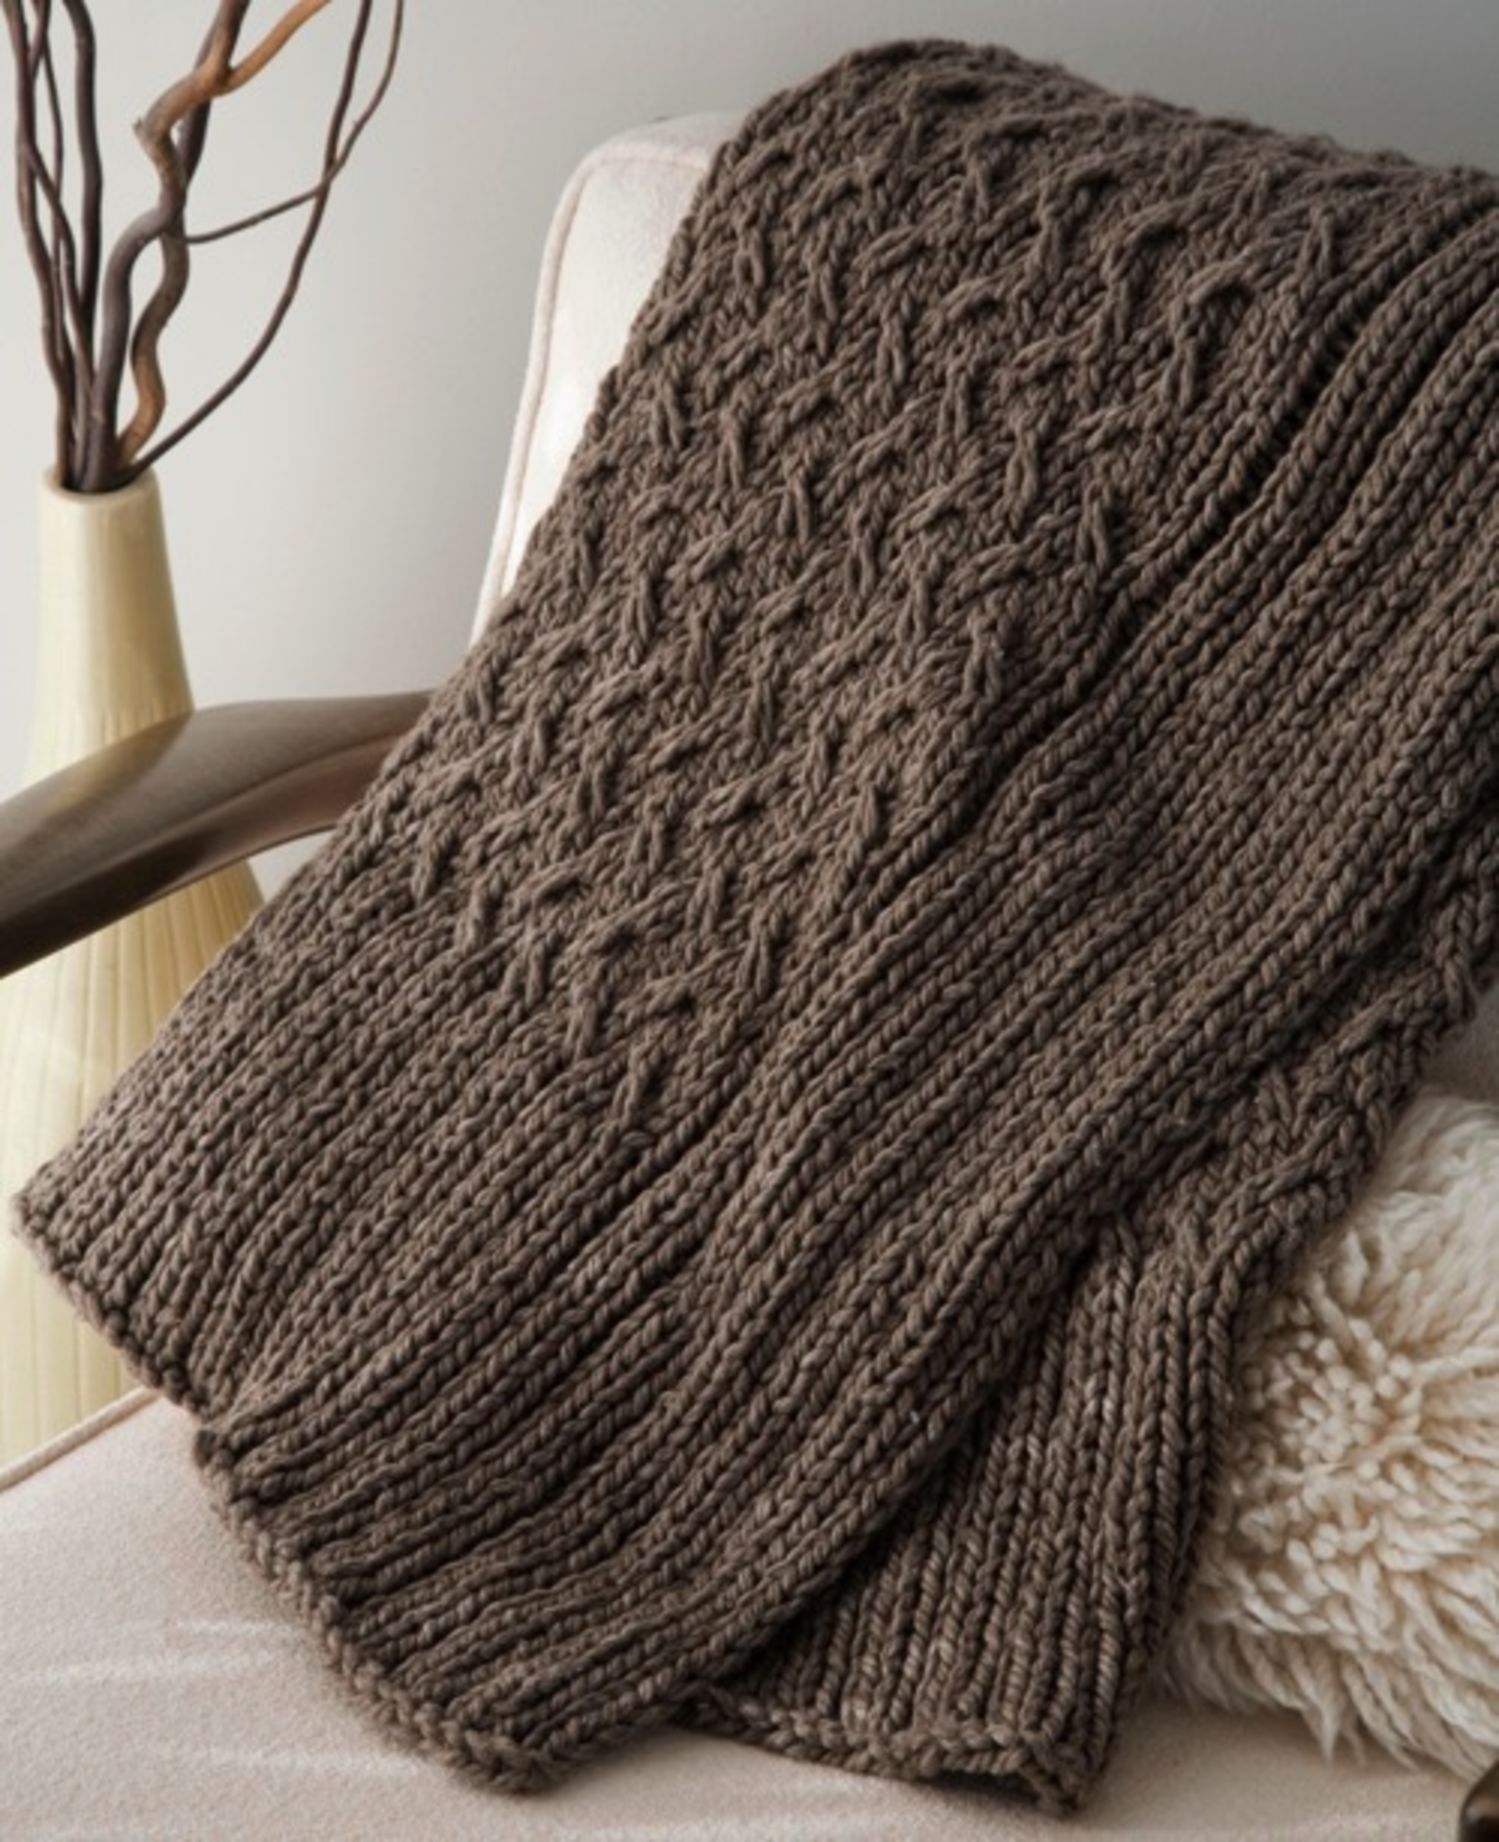 5 Great Knitting  Patterns  for the Home  Apartment Therapy